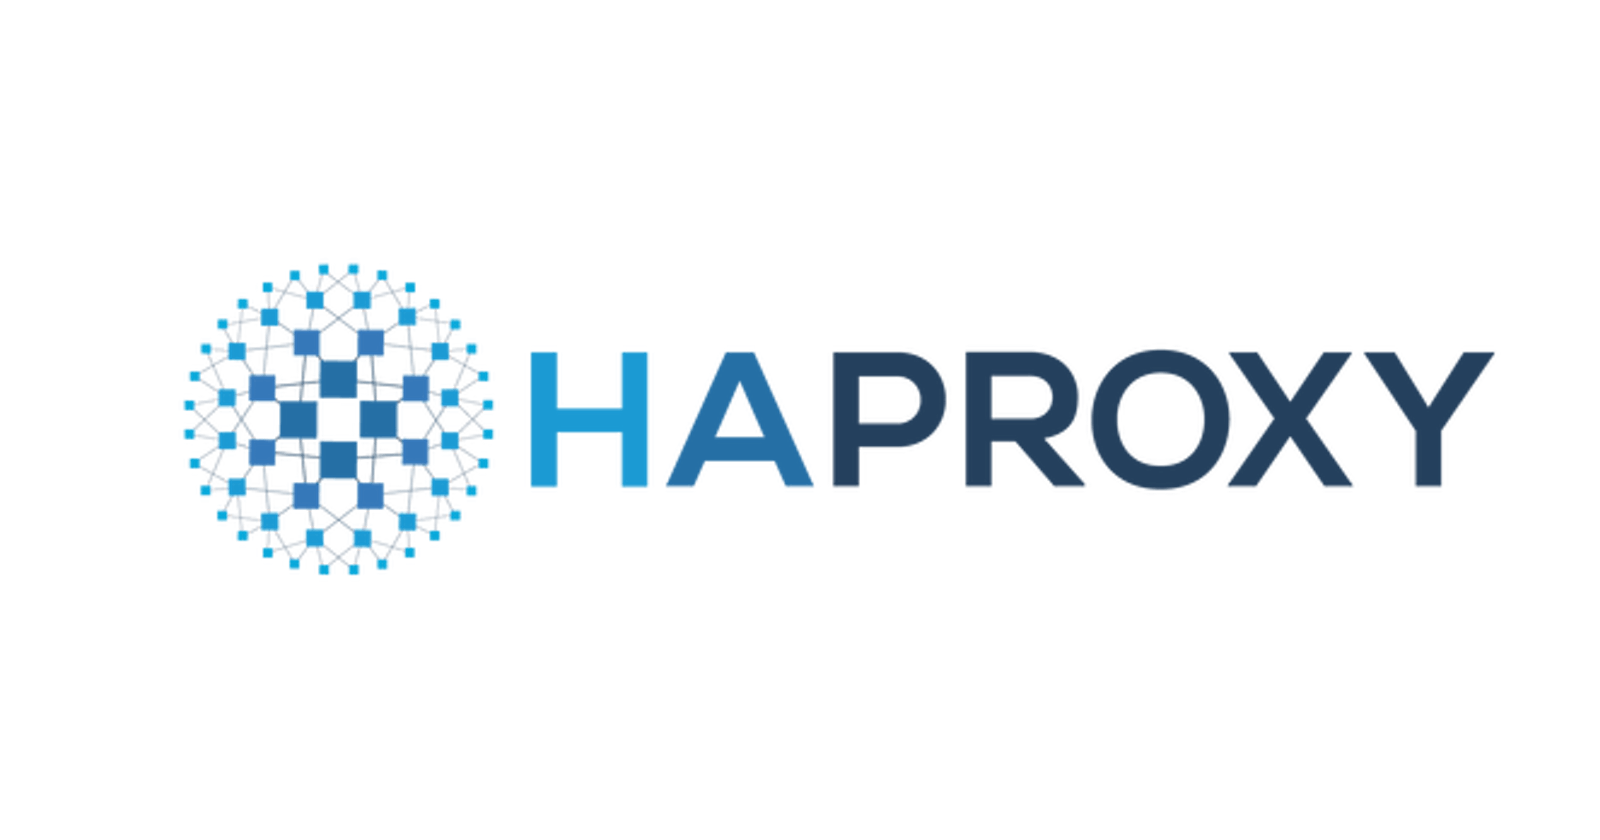 Install and Configure HAProxy LBR